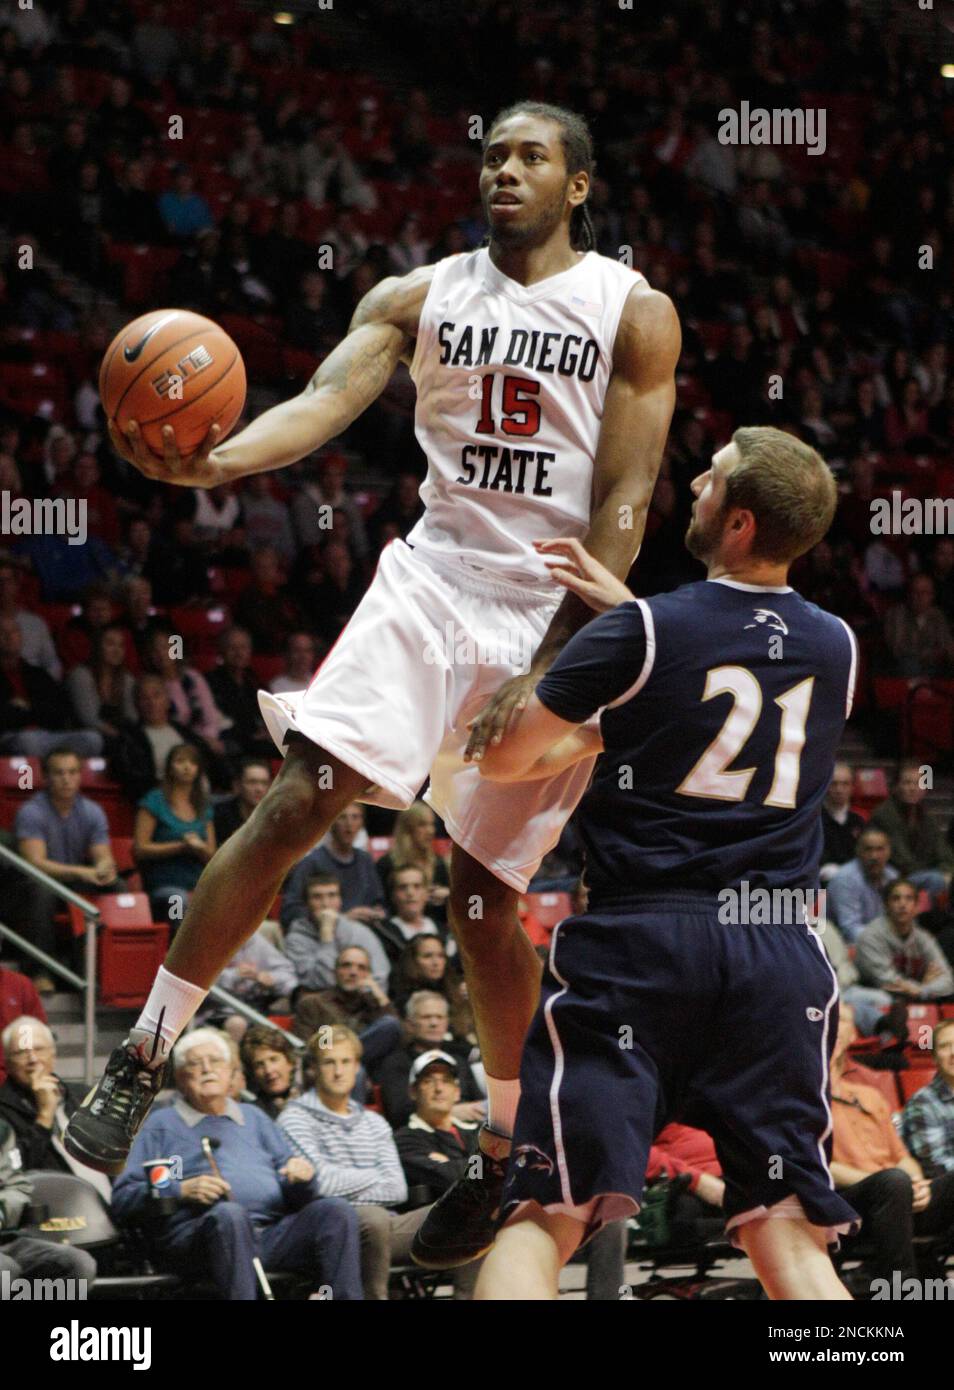 San Diego State's Kawhi Leonard (15) sails over San Diego Christian's Tyler Mutton while going to the rim during the first half of a NCAA college basketball game, Friday, Nov. 26, 2010, in San Diego. (AP Photo/Lenny Ignelzi) Stock Photo